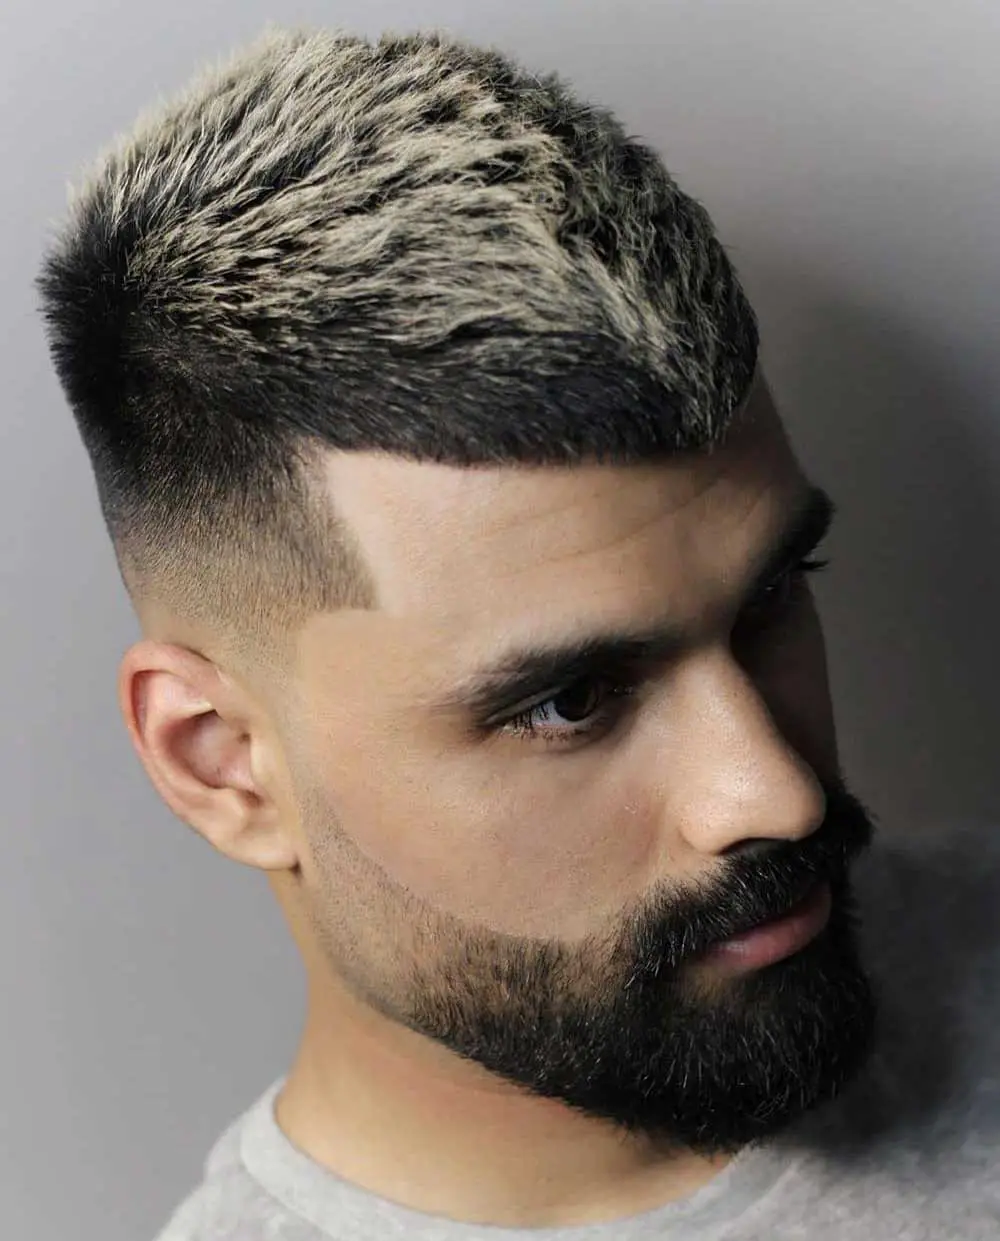 40+ Best Crop Top Fade Haircuts for Men in 2023 - Men's Hairstyle Tips